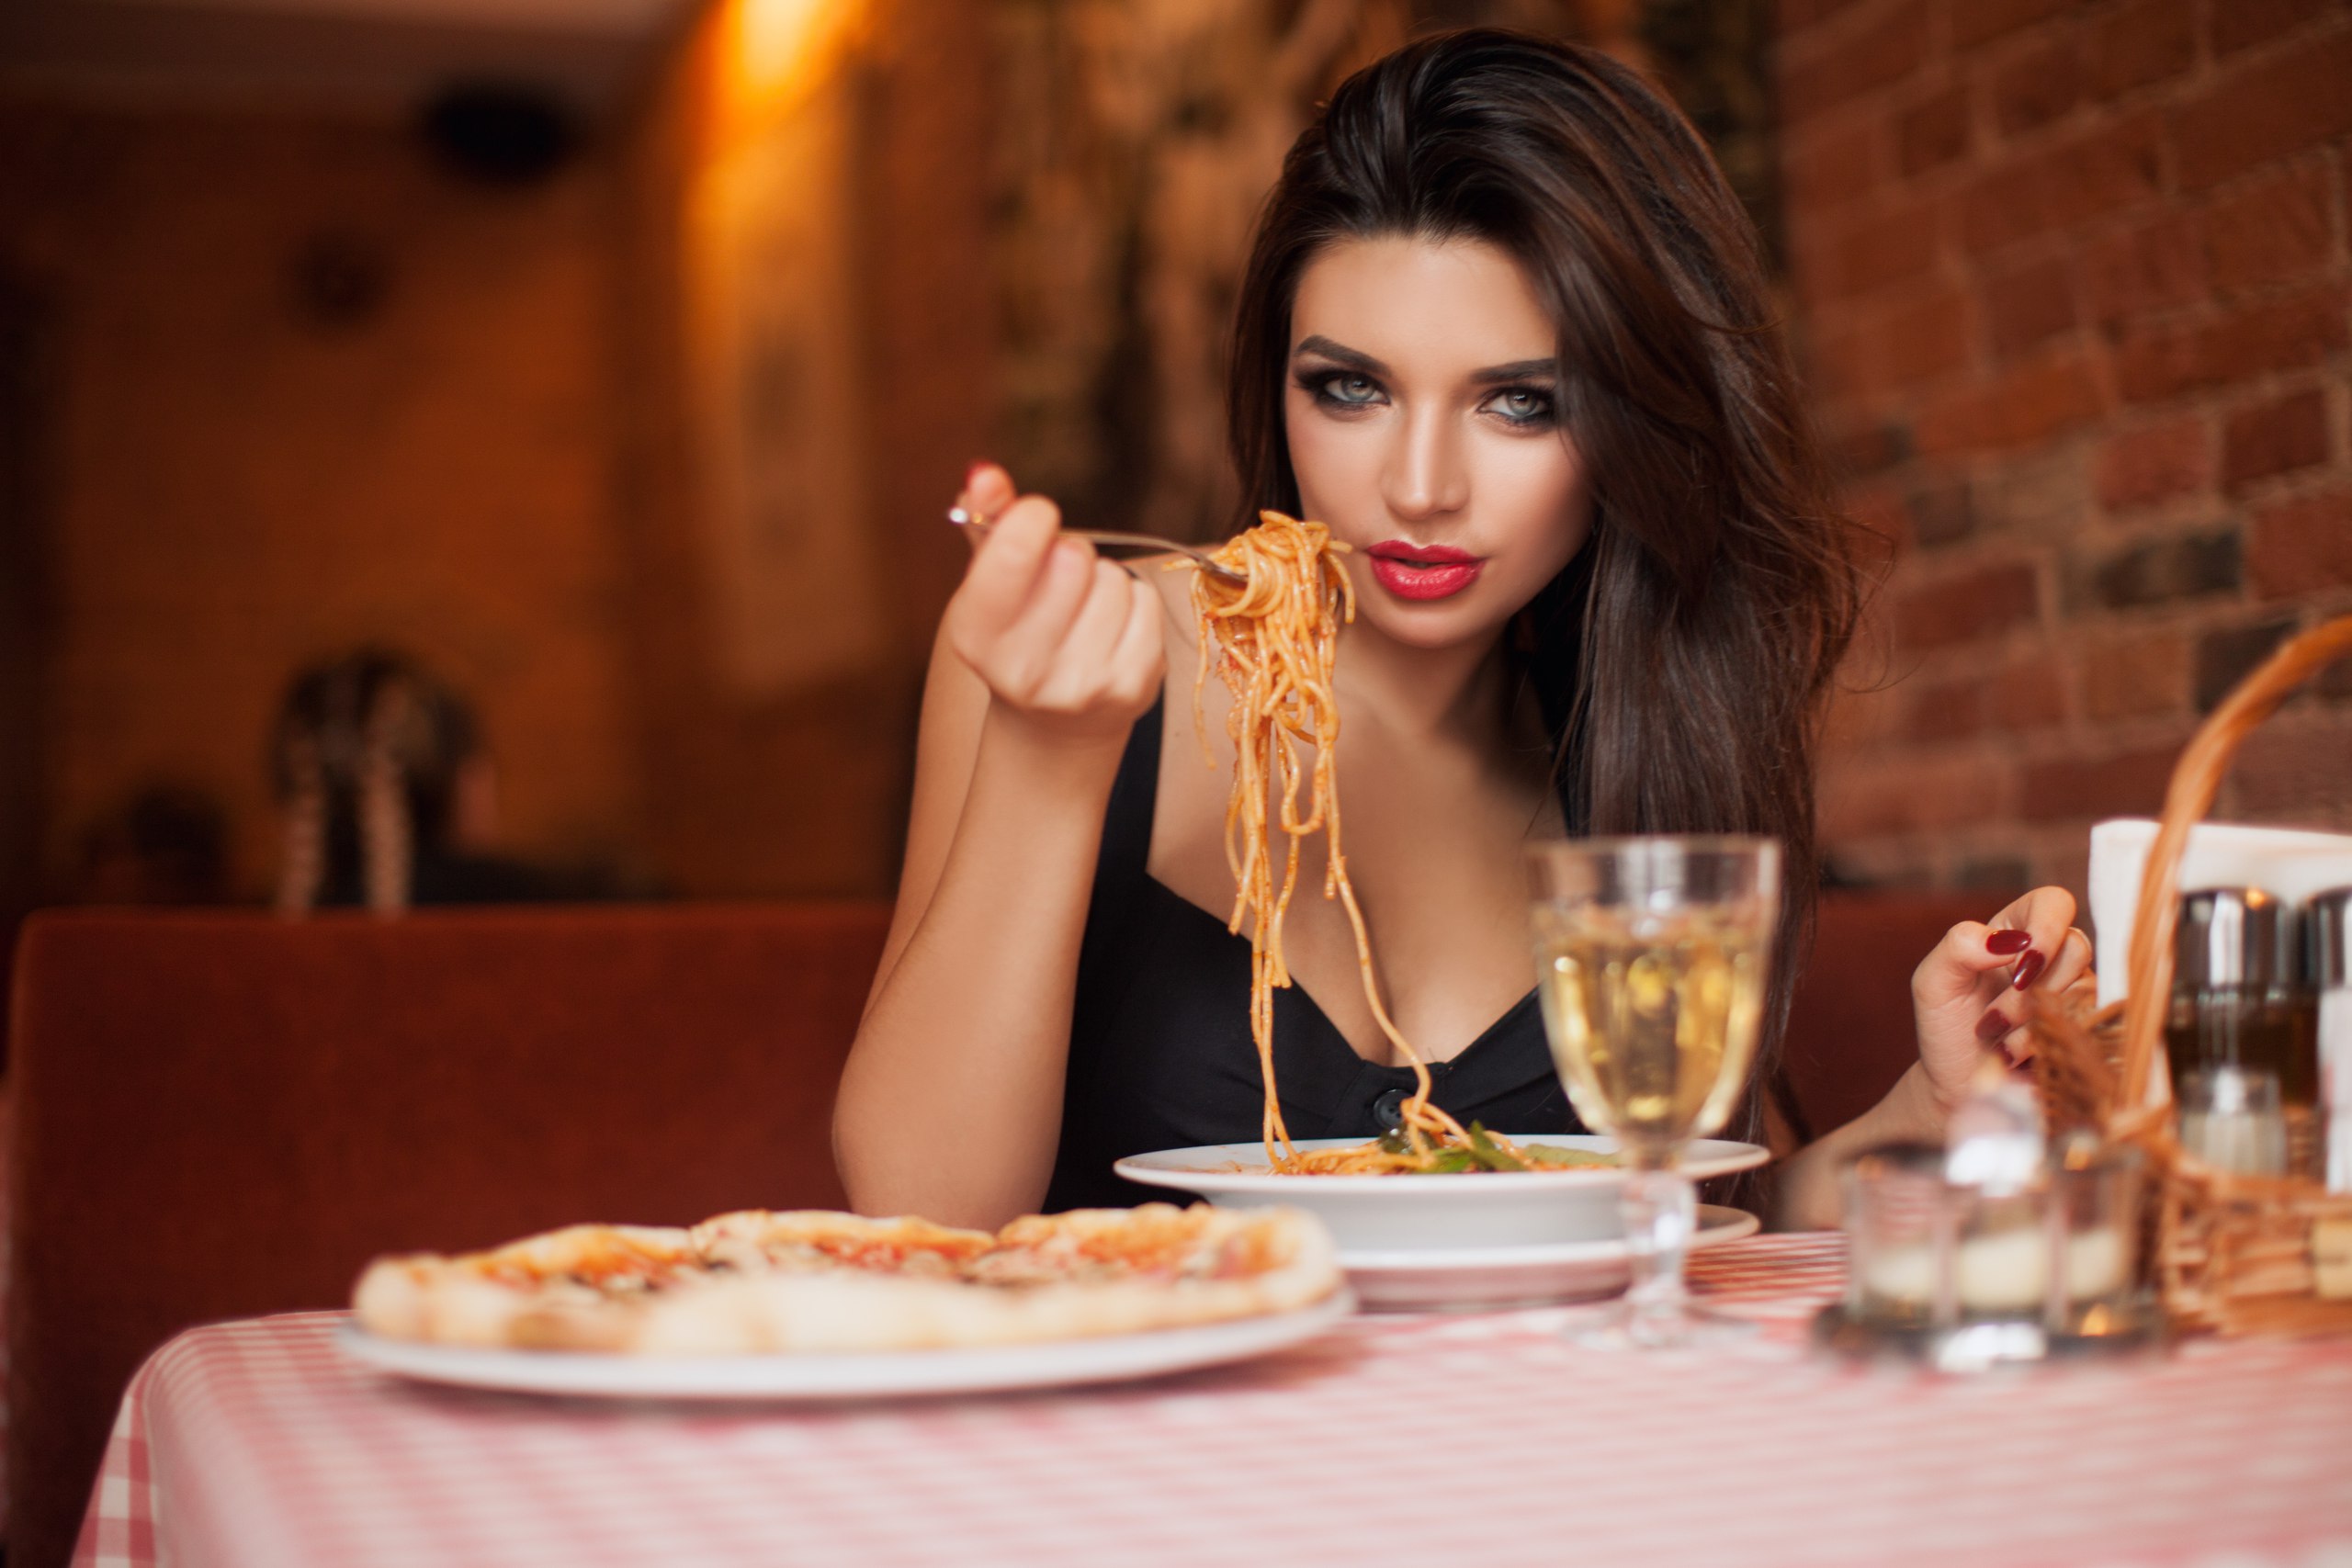 Women Spaghetti Red Lipstick Red Nails Face Food Table Portrait Depth Of Field Eating Restaurant Bru 2560x1707